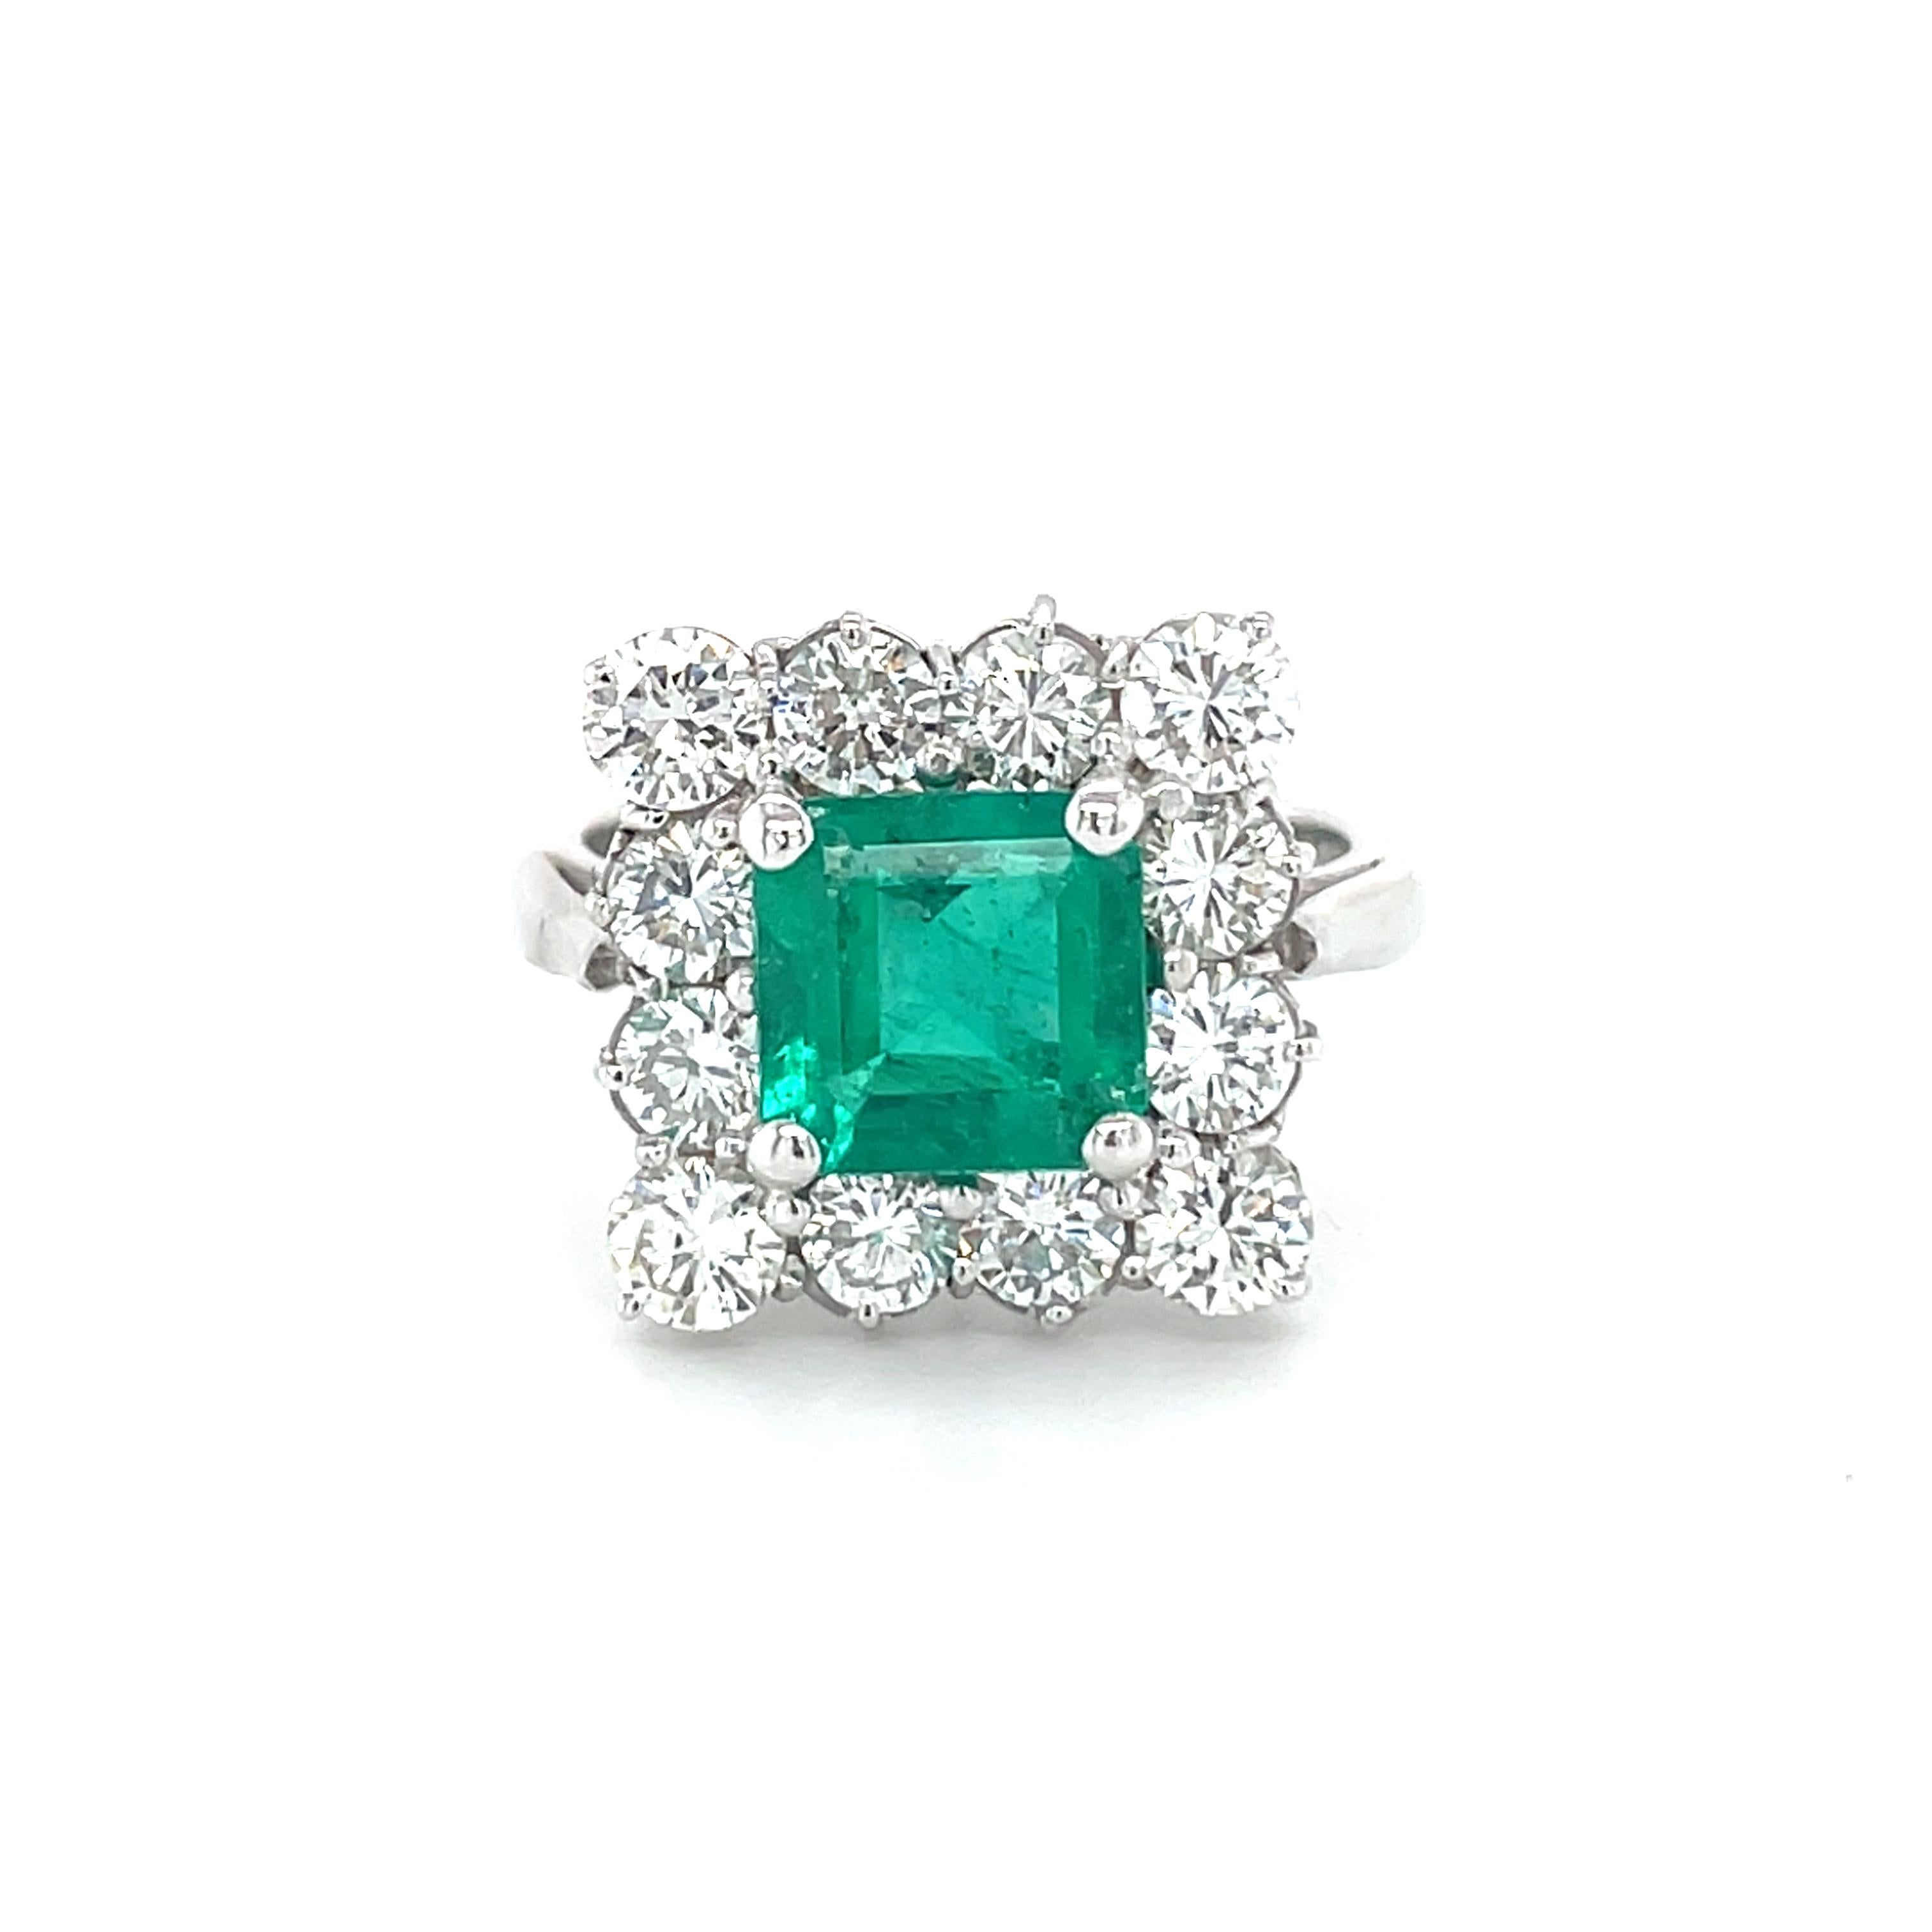 This 18K white gold stunning ring is from our Timeless Collection. It is made of a beautiful square cut emerald 1.72 Carat decorated by natural colorless round brilliant diamonds in total of 1.65 Carat. Total metal weight is 5.42 gr.  Extraordinary